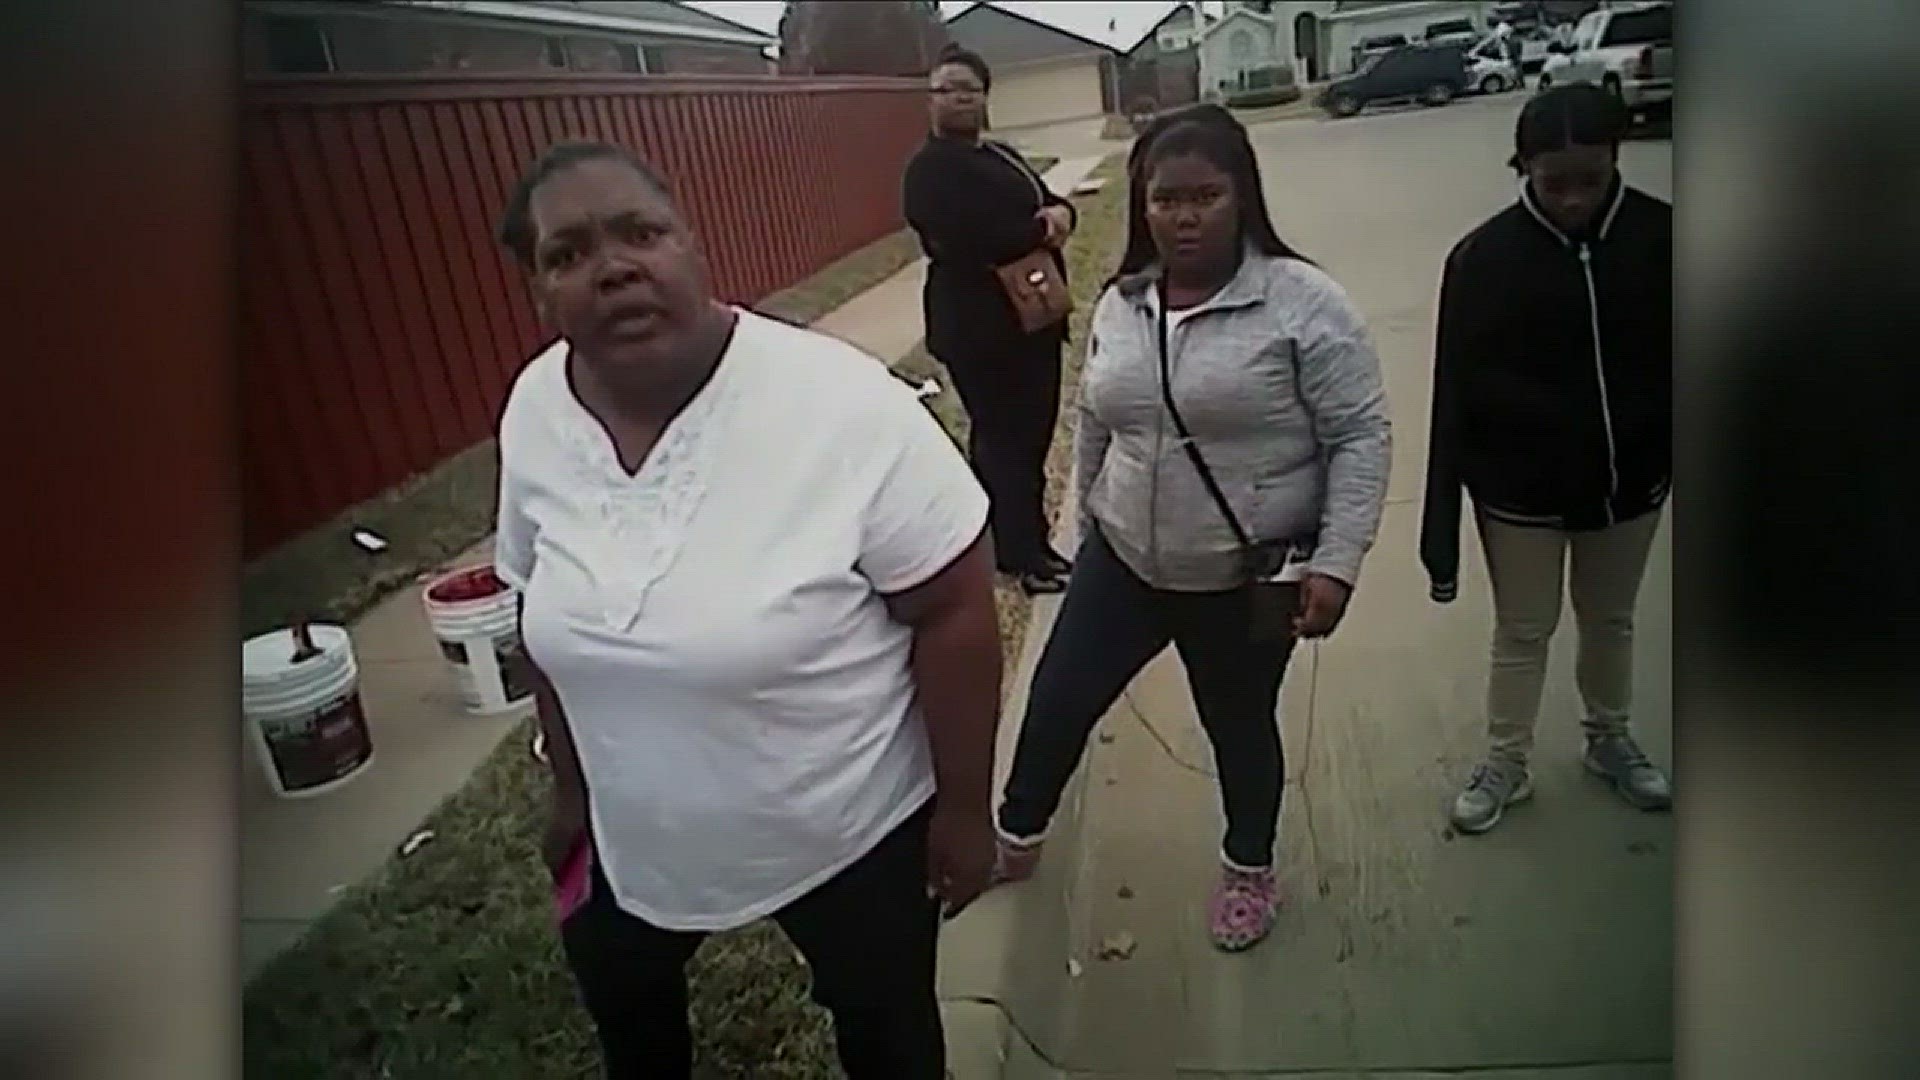 Exclusive: Mother in controversial Fort Worth police arrest video speaks with activist